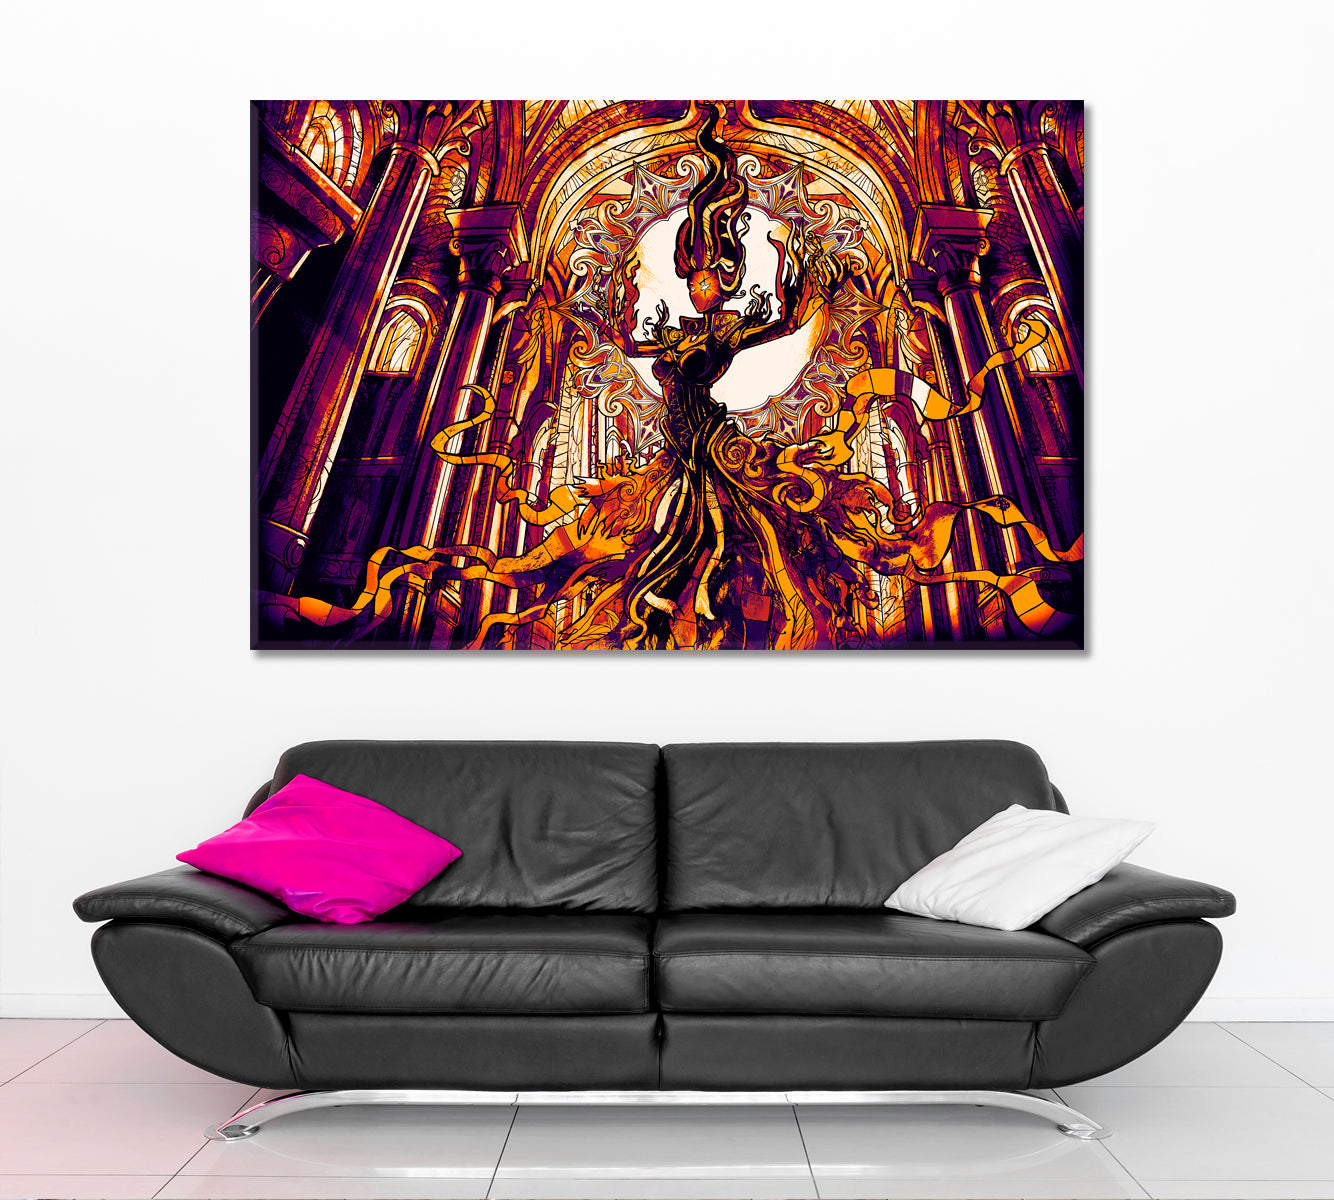 FANTASY Girl Hovers Majestic Cathedral Surreal Fantasy Large Art Print Décor Artesty   